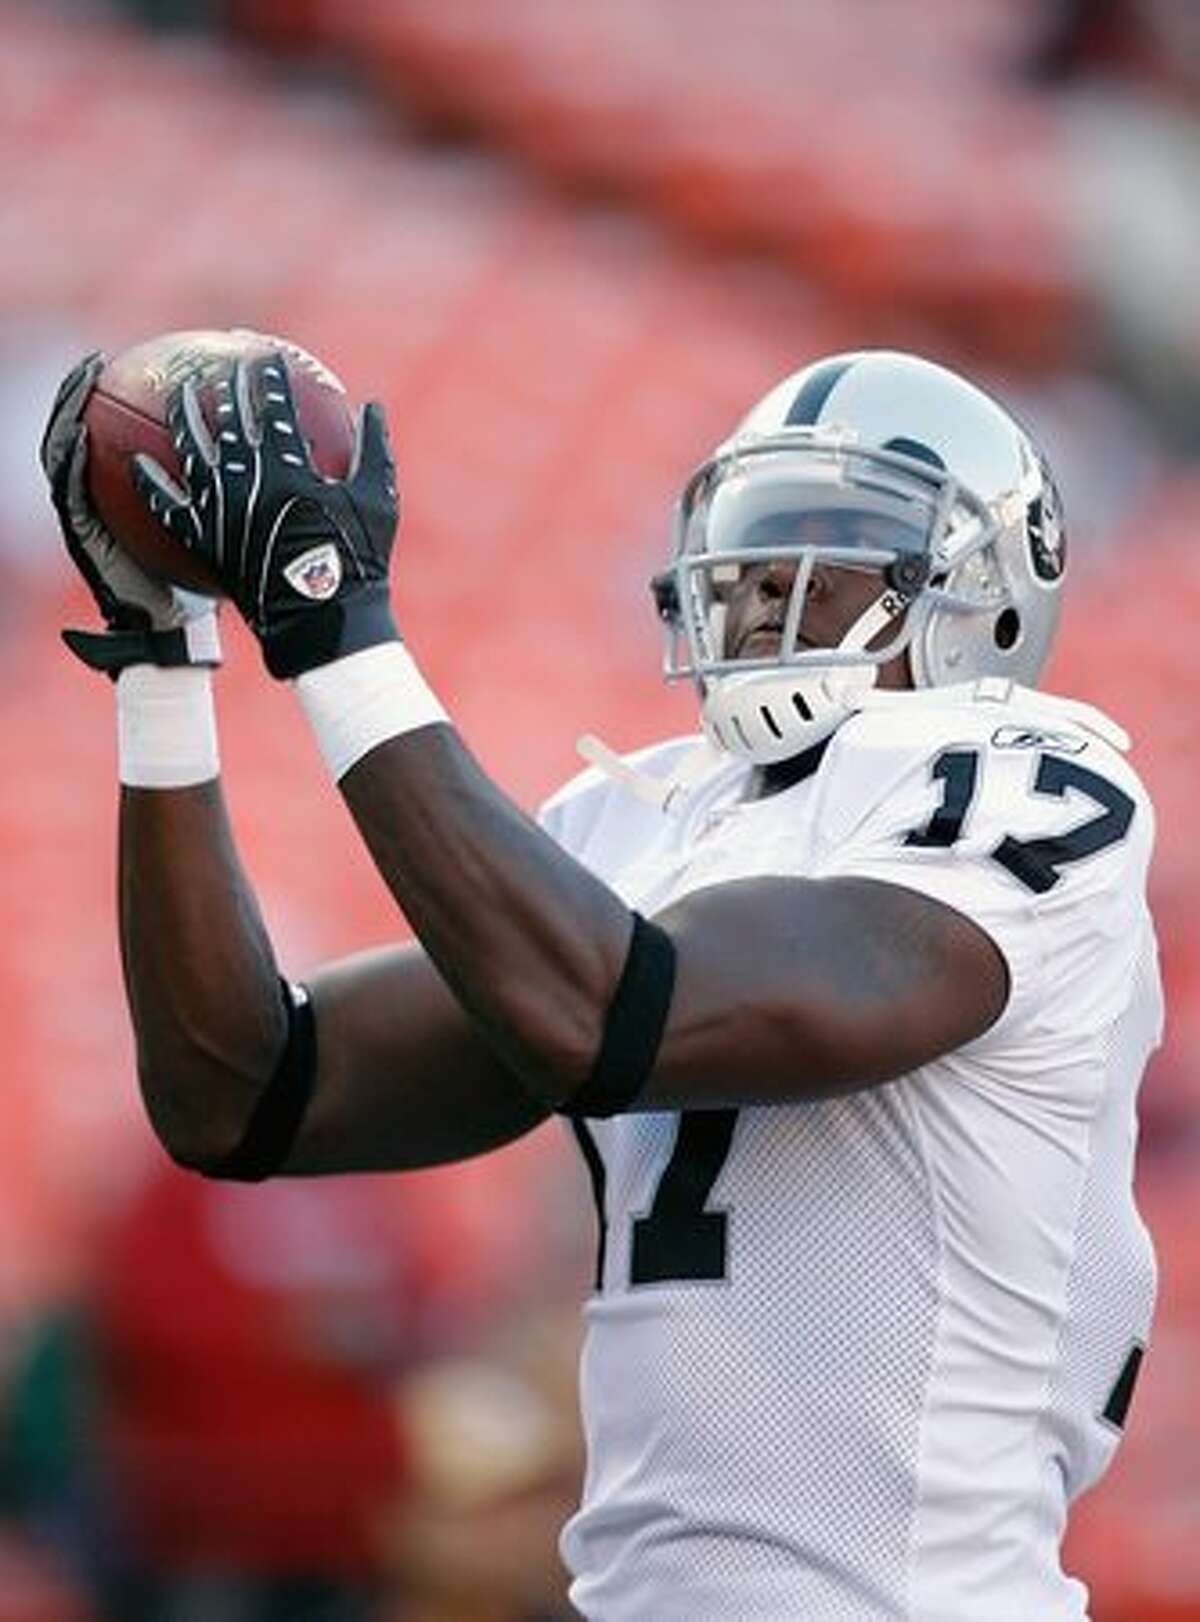 7) How much will Burleson be missed? Detroit paid big money to lure Nate Burleson away. The Seahawks pondered trading for Brandon Marshall and, to a lesser extent, Vincent Jackson. Clearly they see a need for receiving help. Instead, they stuck with drafting Tate and bringing in some recycled projects like Mike and Reggie Williams and ex-Husky QB Isaiah Stanback. Reggie Williams already washed out, but Mike Williams, above, is worth watching as a big target and Tate will be a big-play man despite his small stature. The real questions are whether T.J. Houshmandzadeh can live up to his own lofty expectations, whether Deion Branch really has a spot in Jeremy Bates' offense, if young Deon Butler can emerge and how long it'll take Tate and Williams to assume large chunks of playing time? I've liked what I've seen from waiver wire pickup Kole Heckendorf in the offseason work as well, but with 12 receivers coming to camp, that's a position that is going to be crowded with candidates.